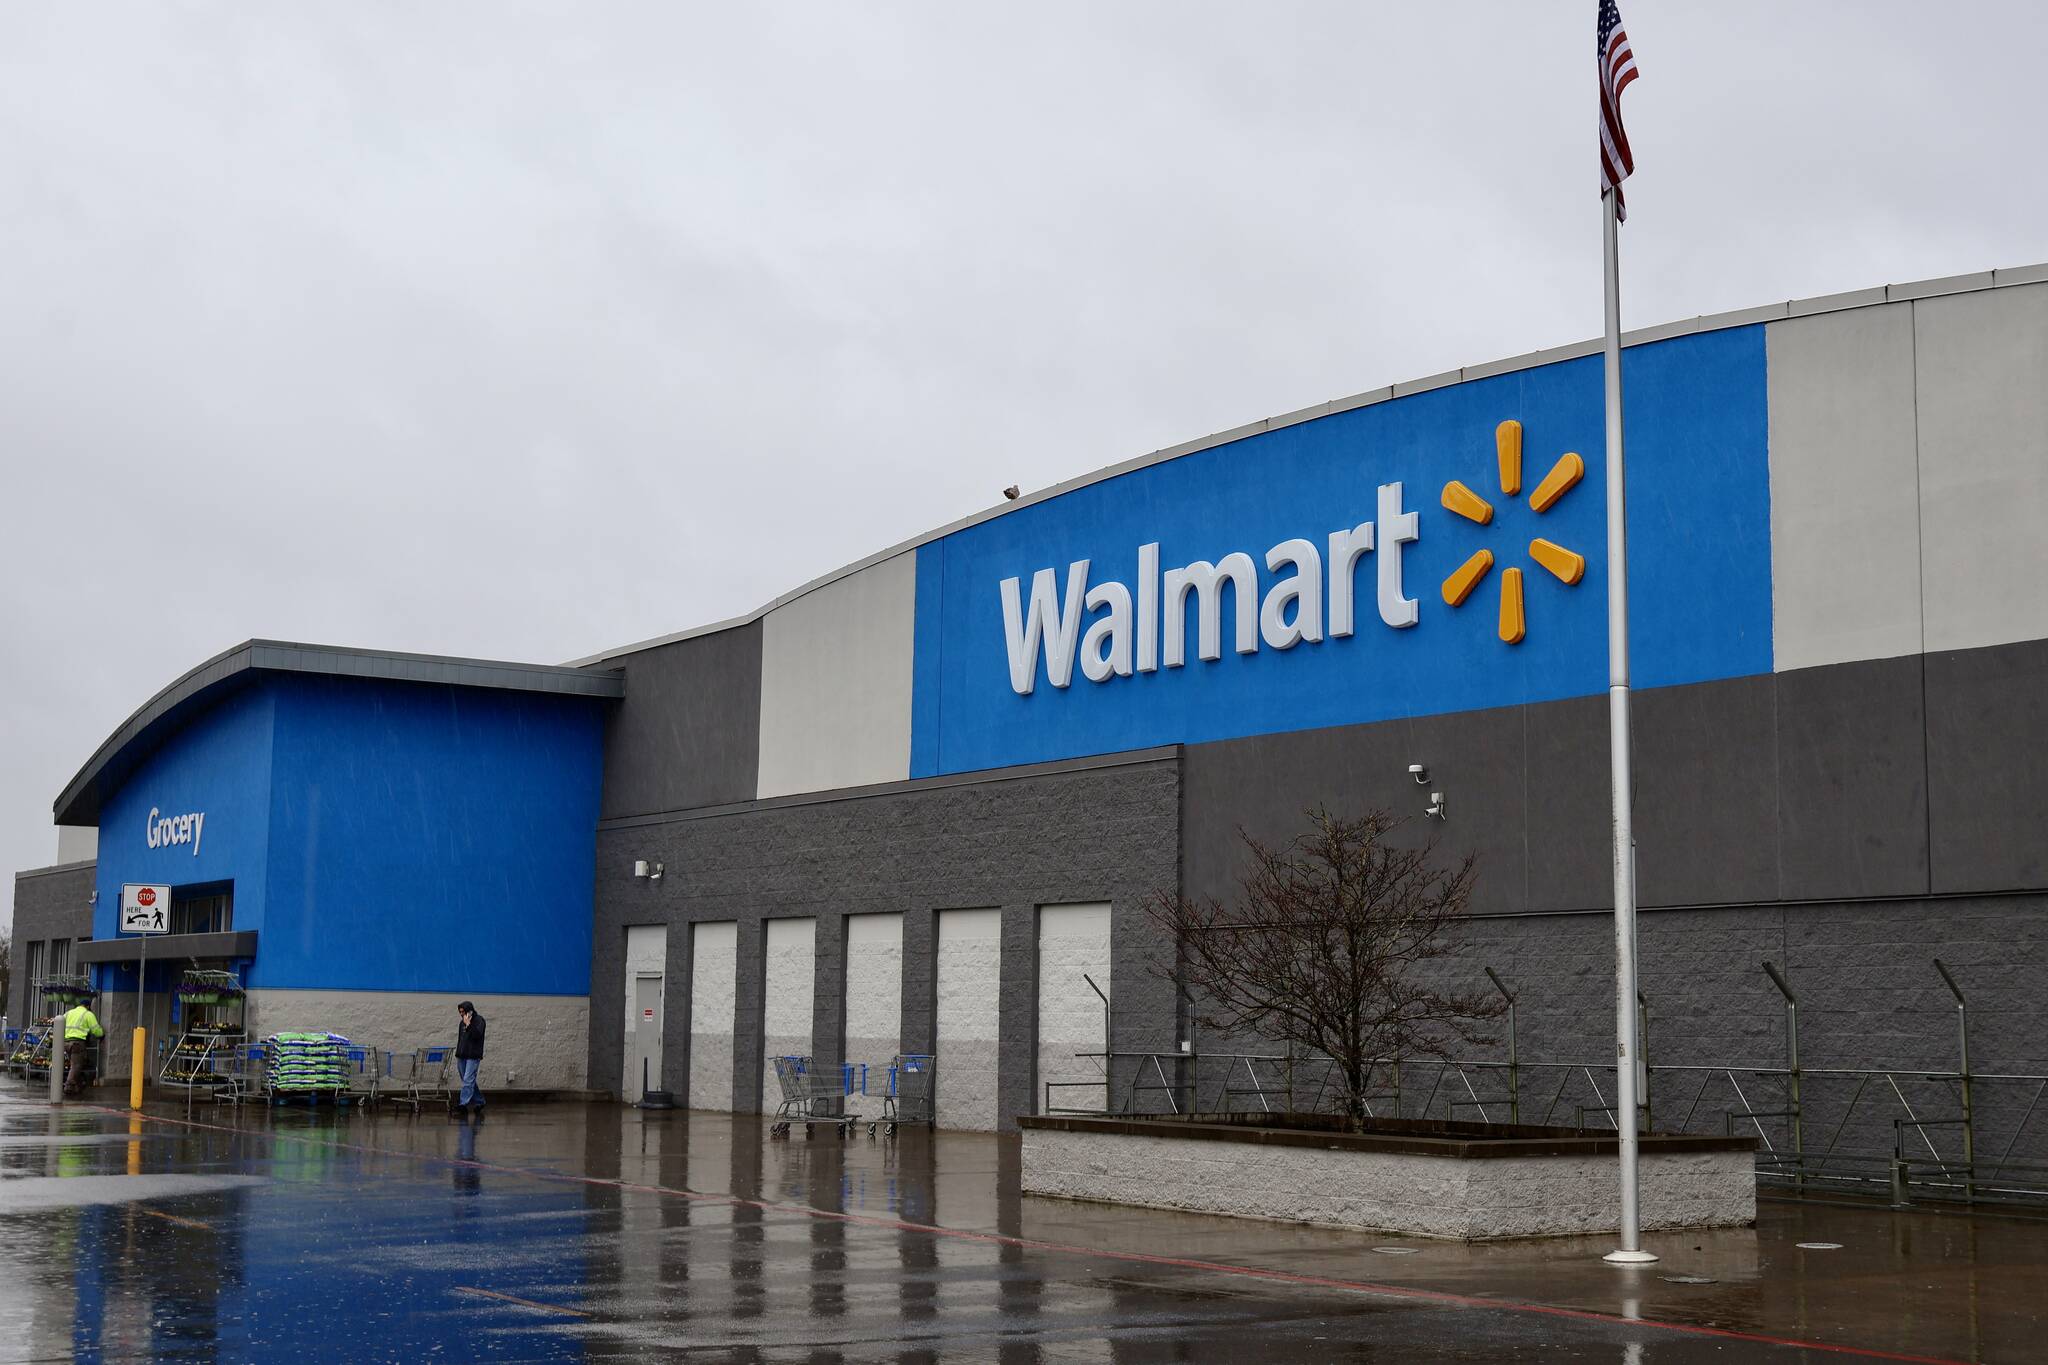 Aberdeen police supported an anti-shoplifting effort at Walmart on Saturday, arresting ten and citing more. (Michael S. Lockett / The Daily World)